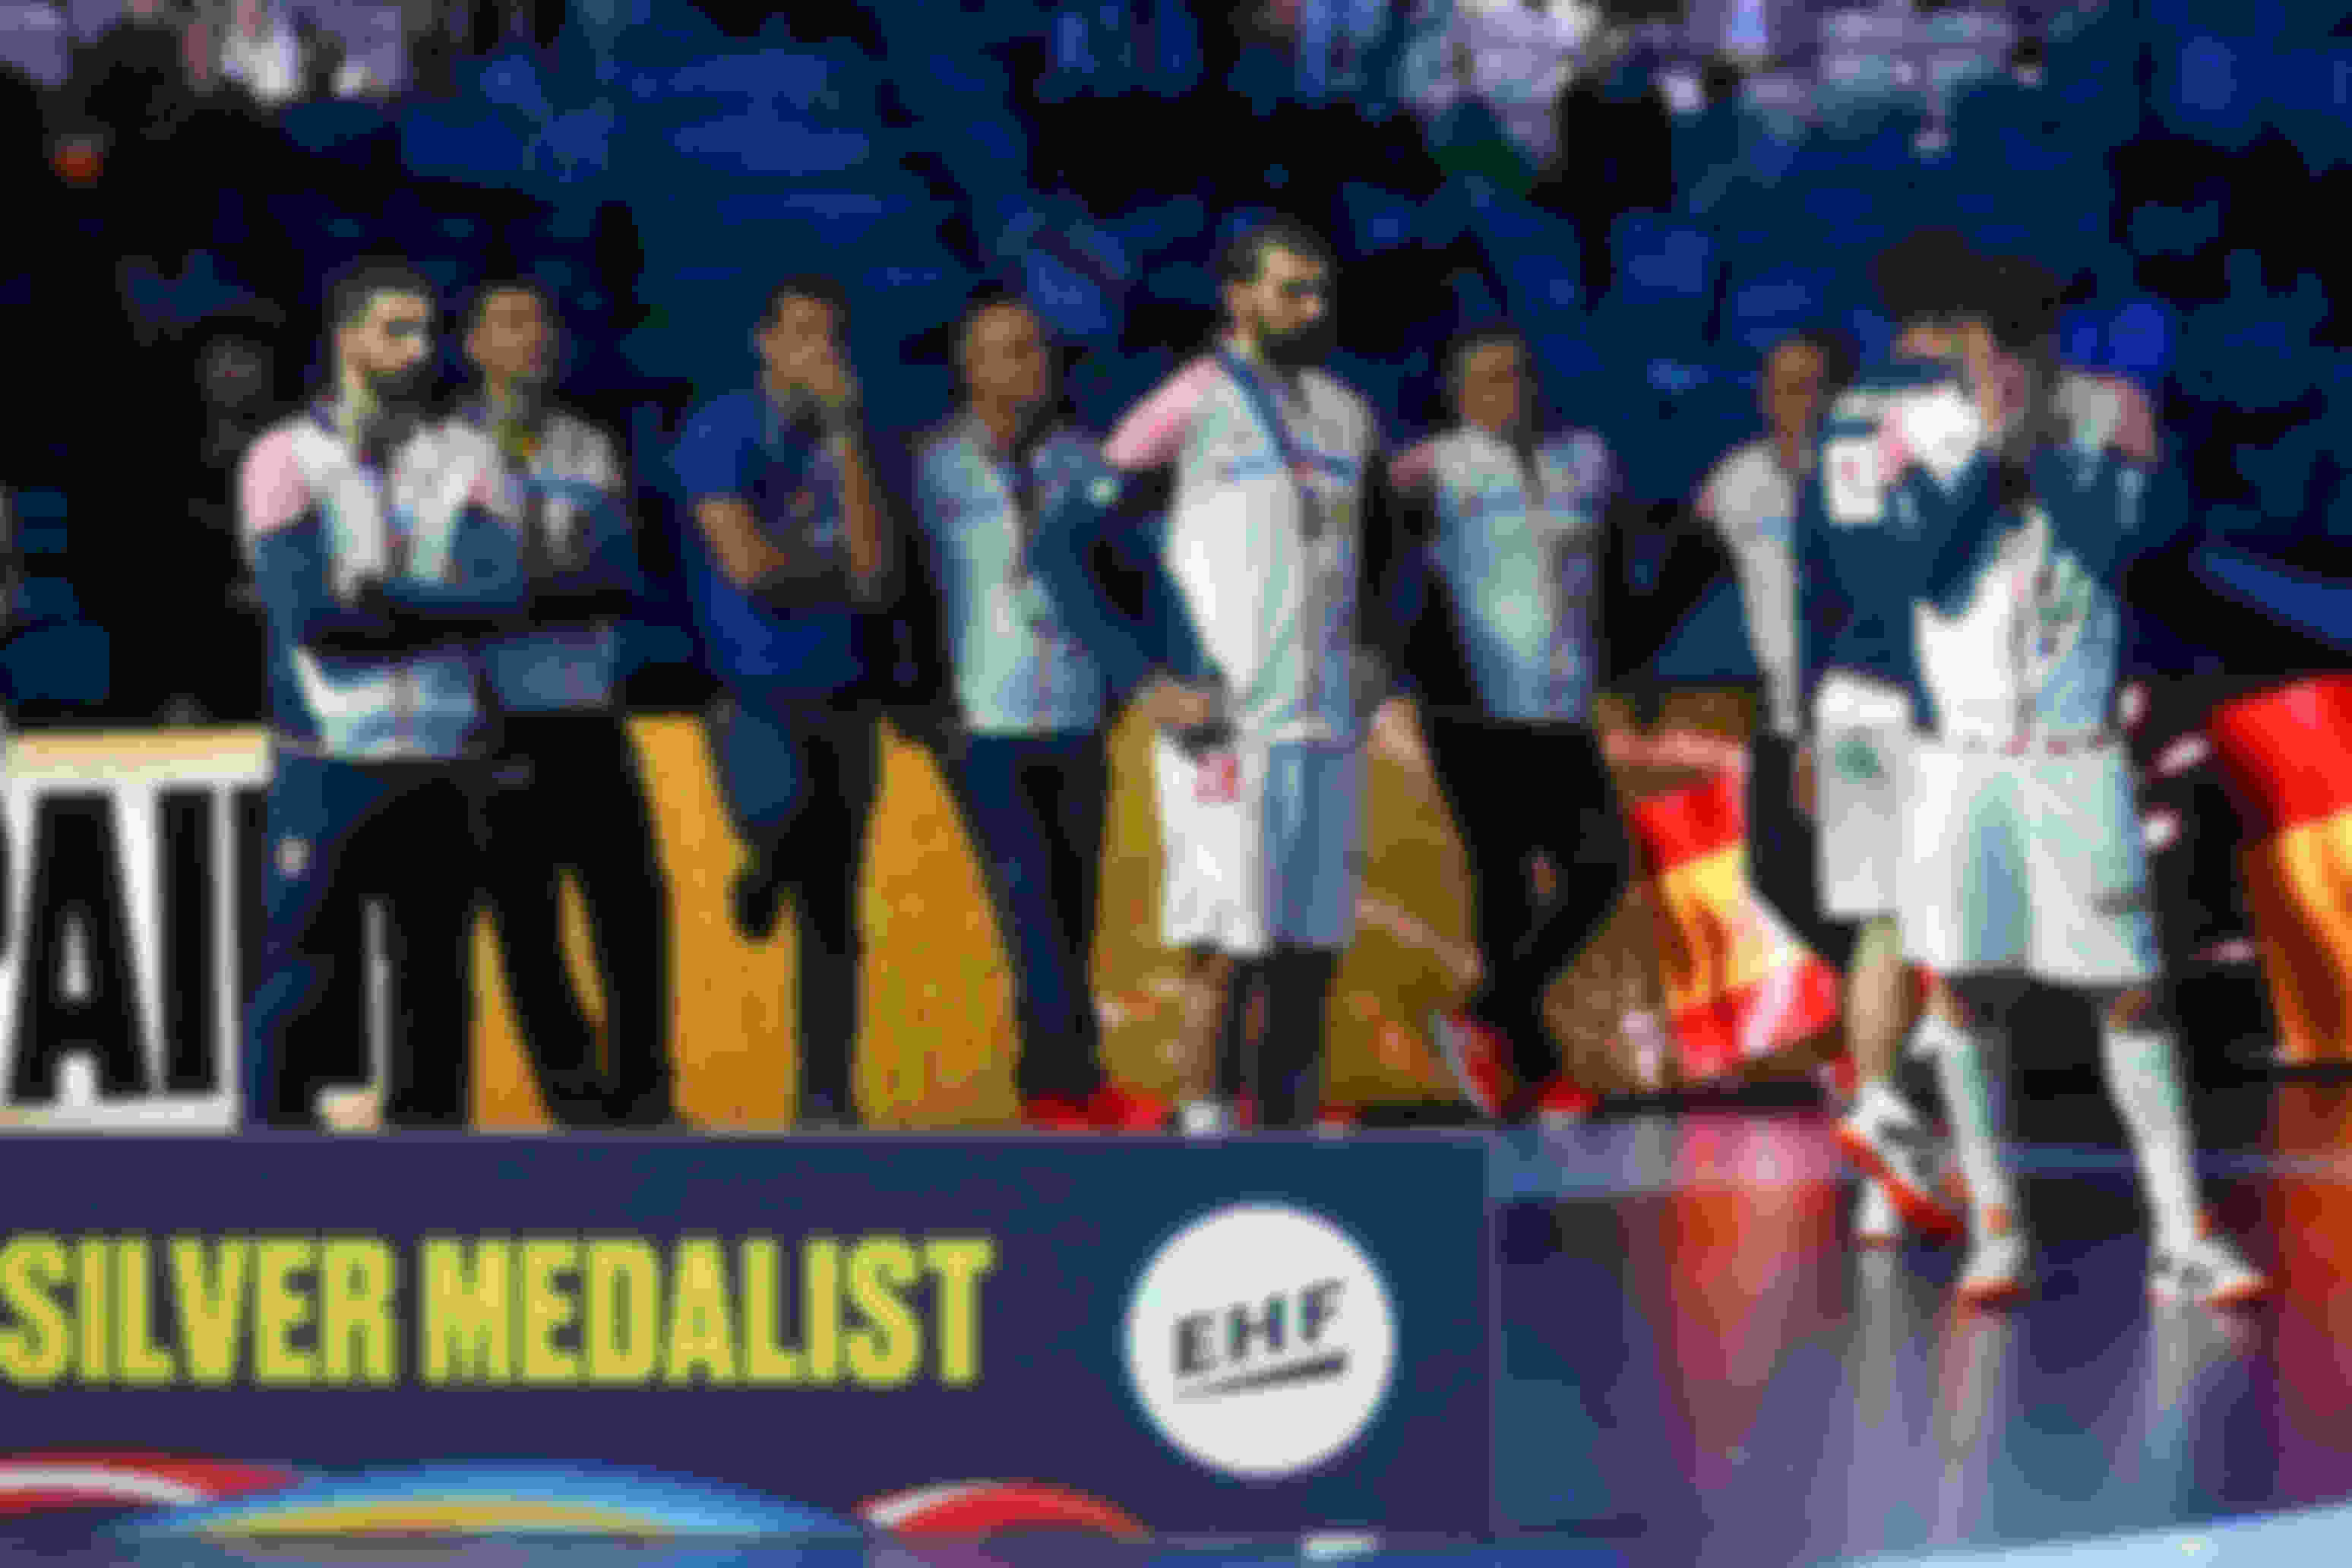 Domagoj Duvnjak  with his head in his hands after Croatia collect their silver medal at the EHF EURO 2020 on January 26, 2020 in Stockholm, Sweden. (Photo by Martin Rose/Bongarts/Getty Images )